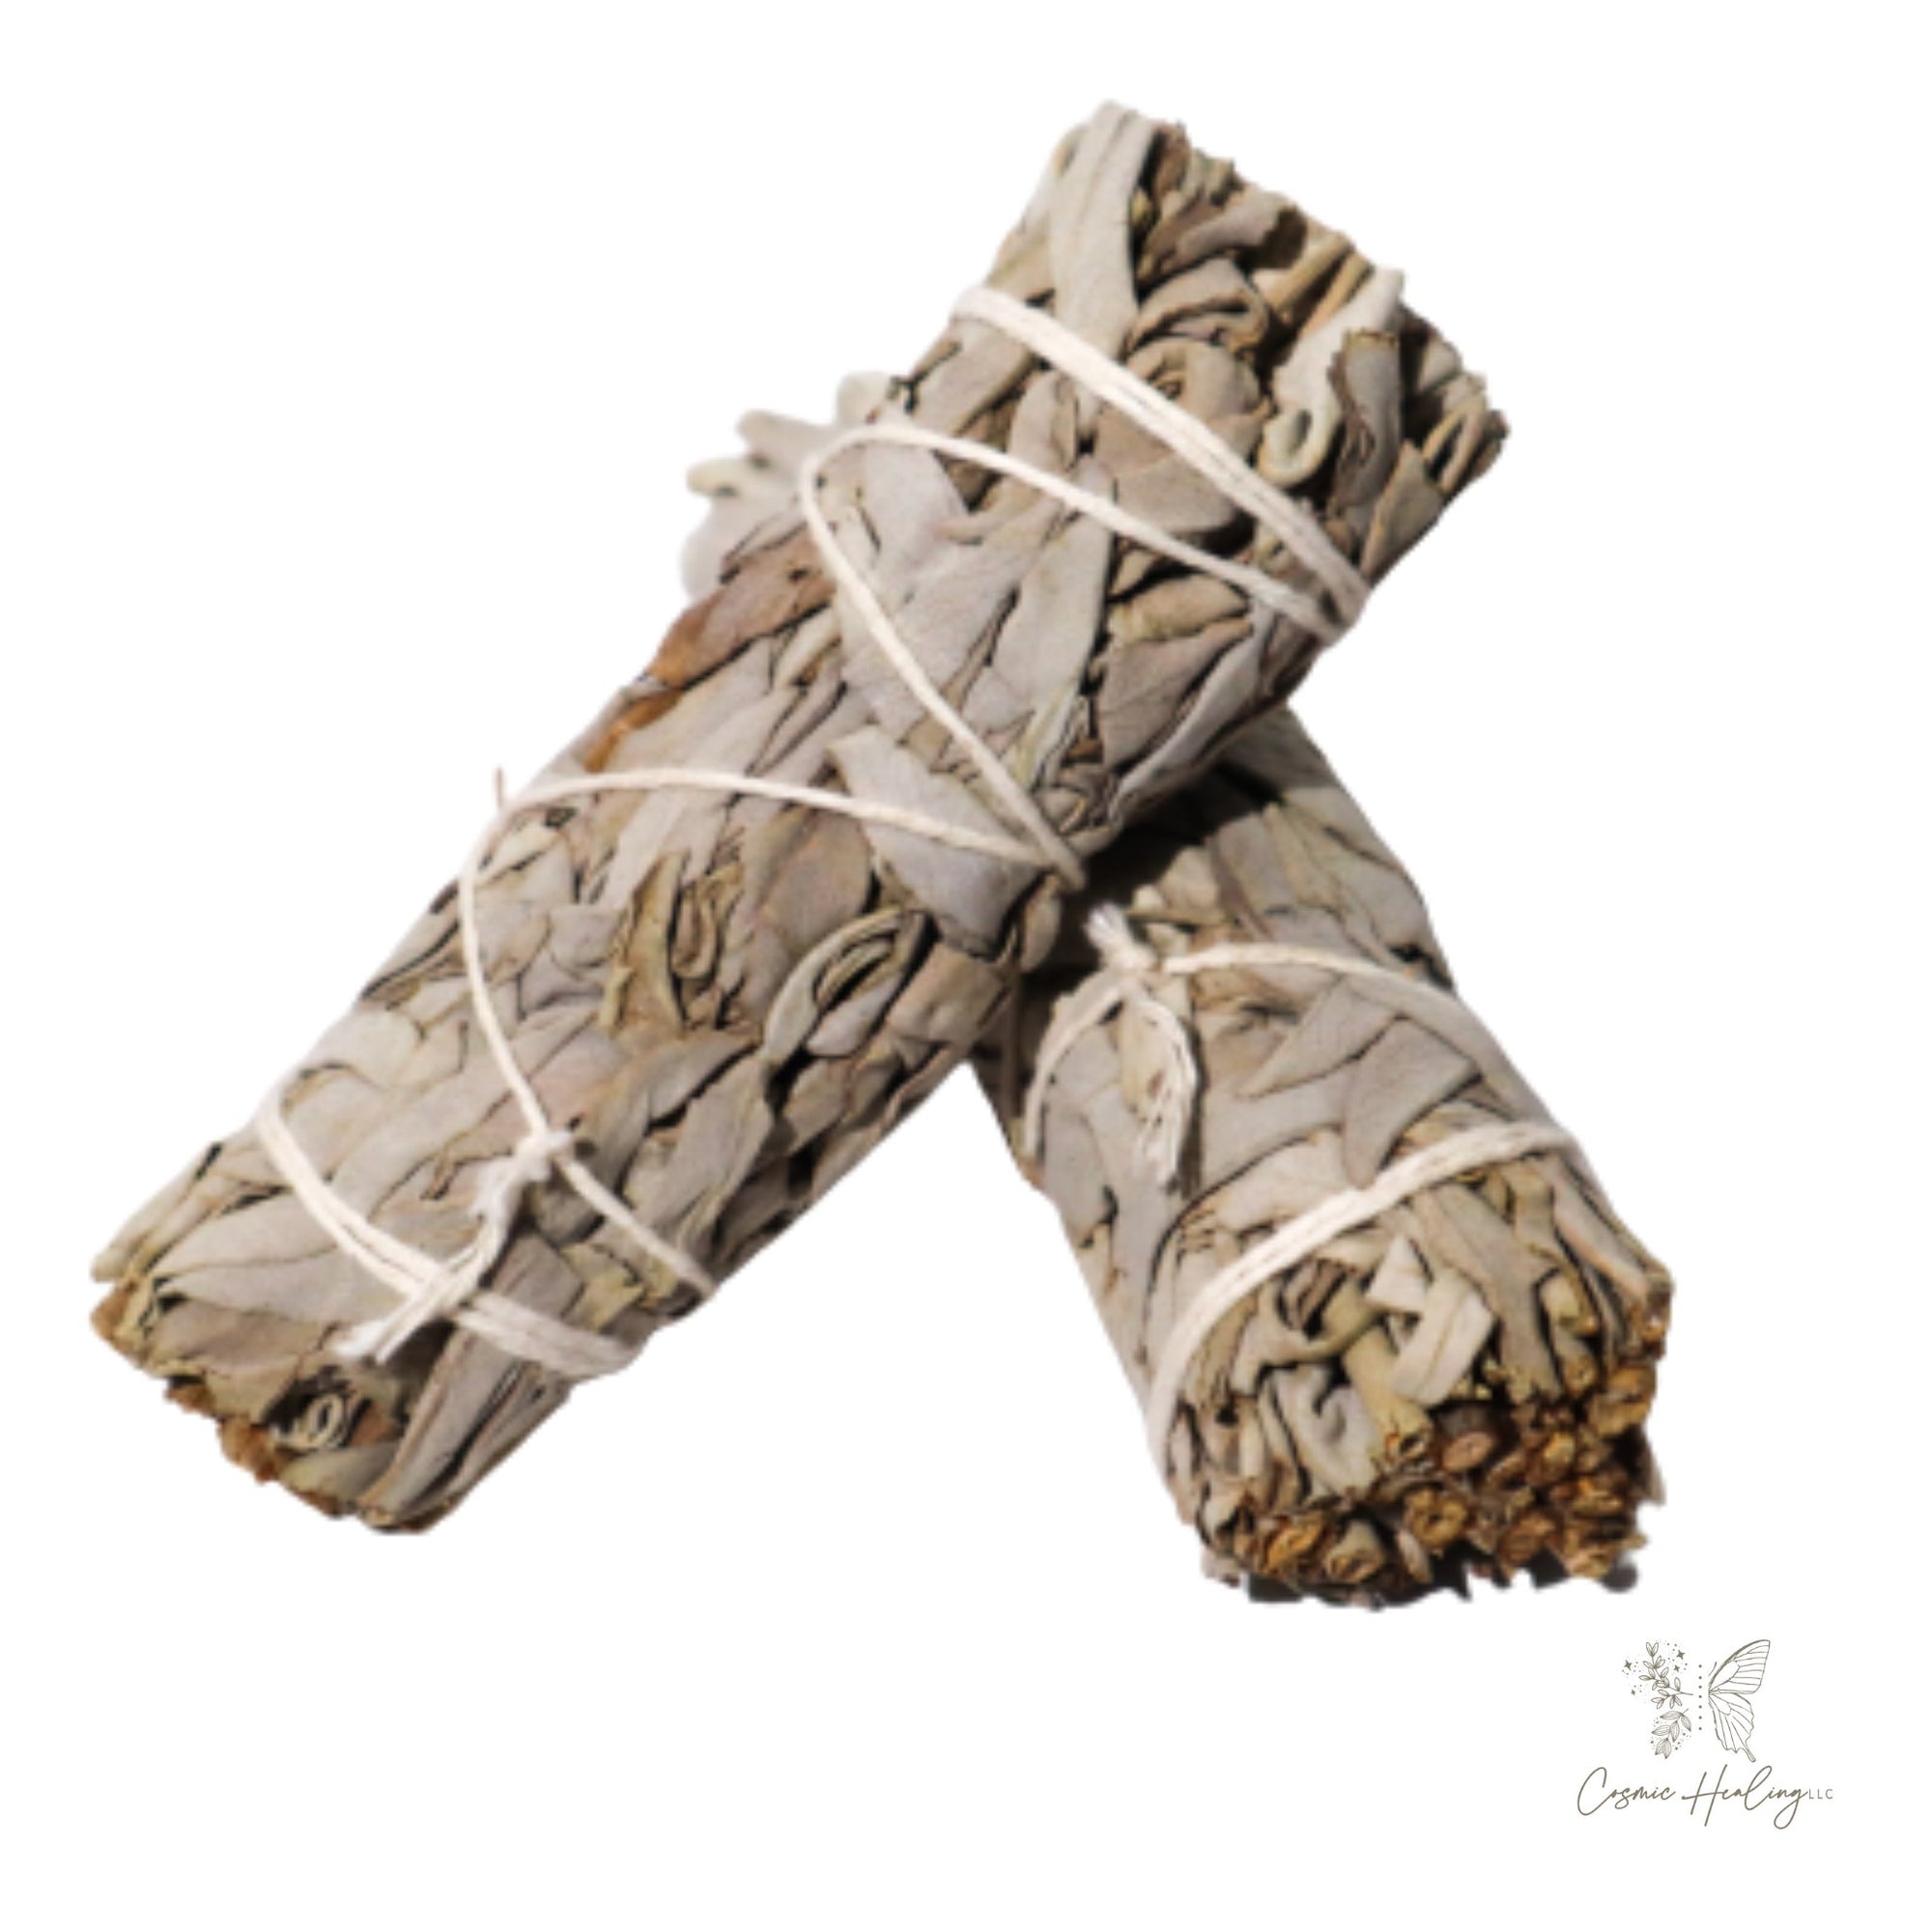 White Sage 4" Bundle to cleanse negative energy from your home - Shop Cosmic Healing